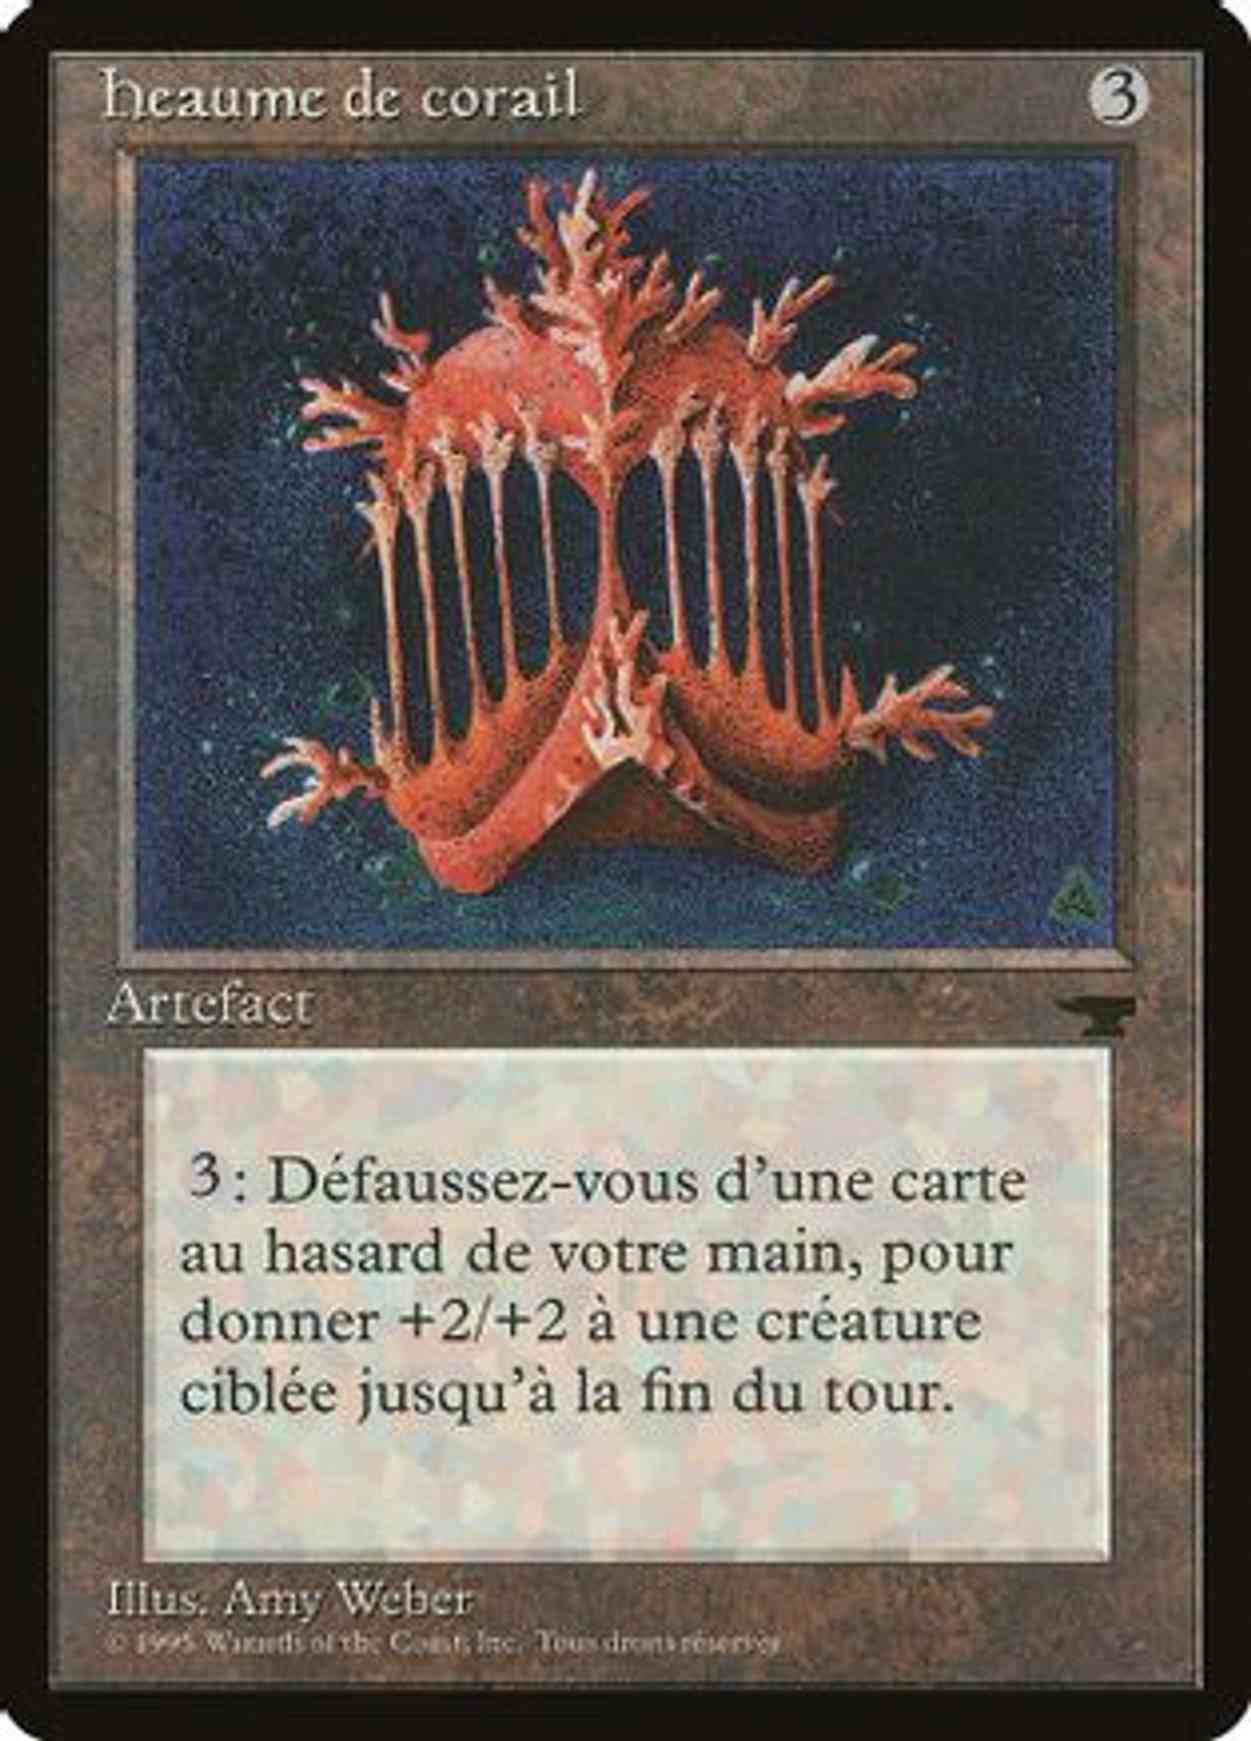 Coral Helm (French) - "Heaume de corail" magic card front